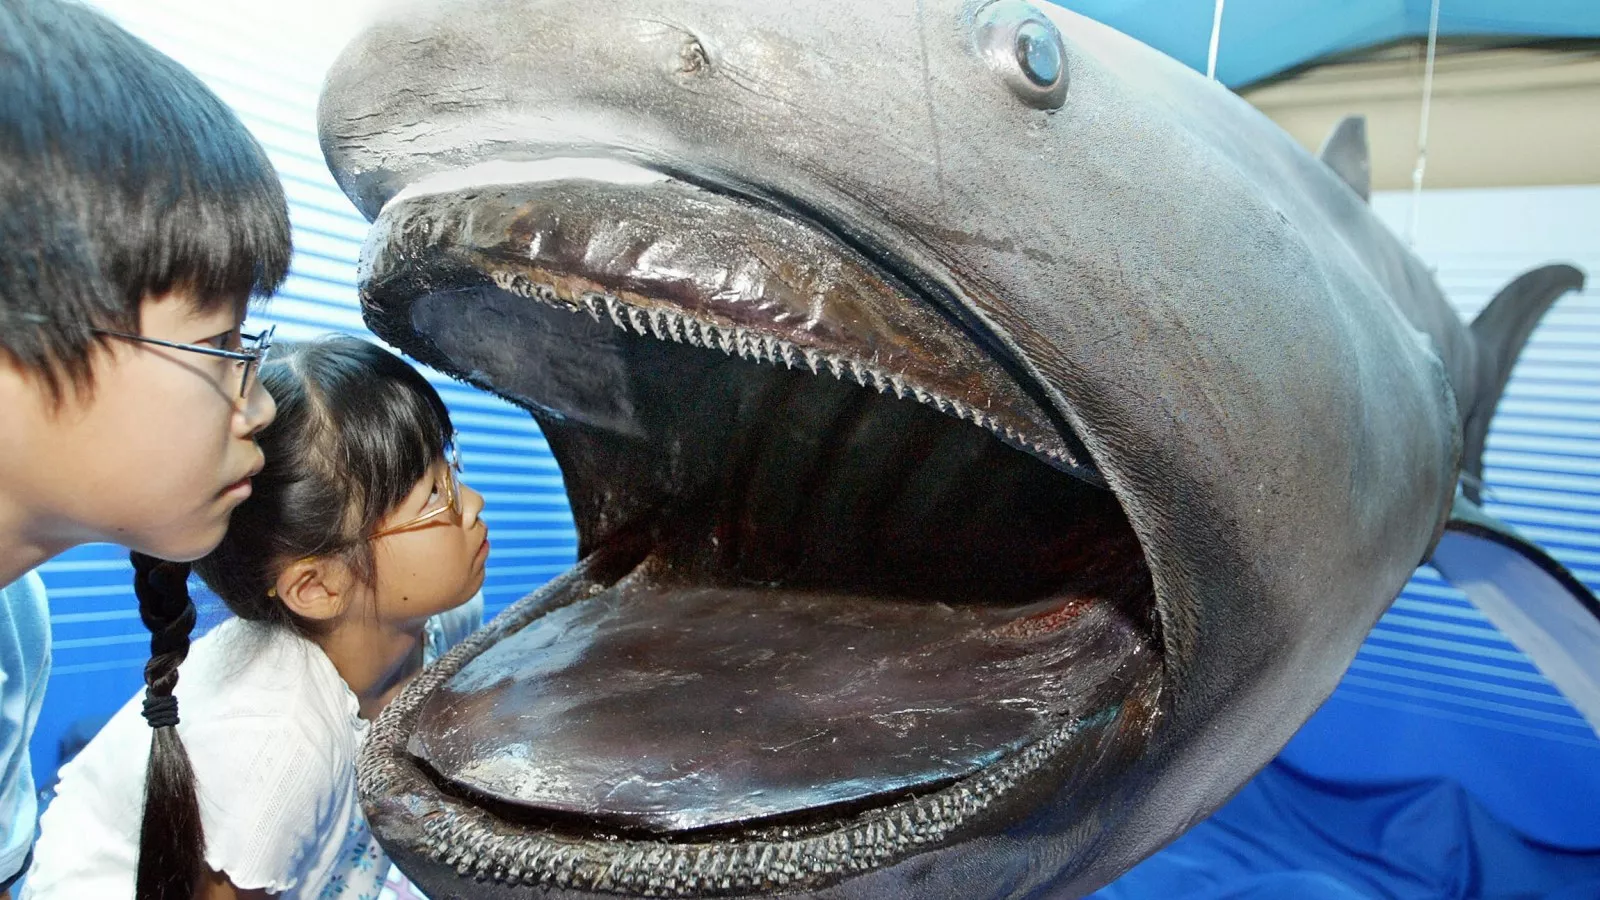 Extremely Rare Megamouth Shark From Ocean Depths Washes Up on Beach